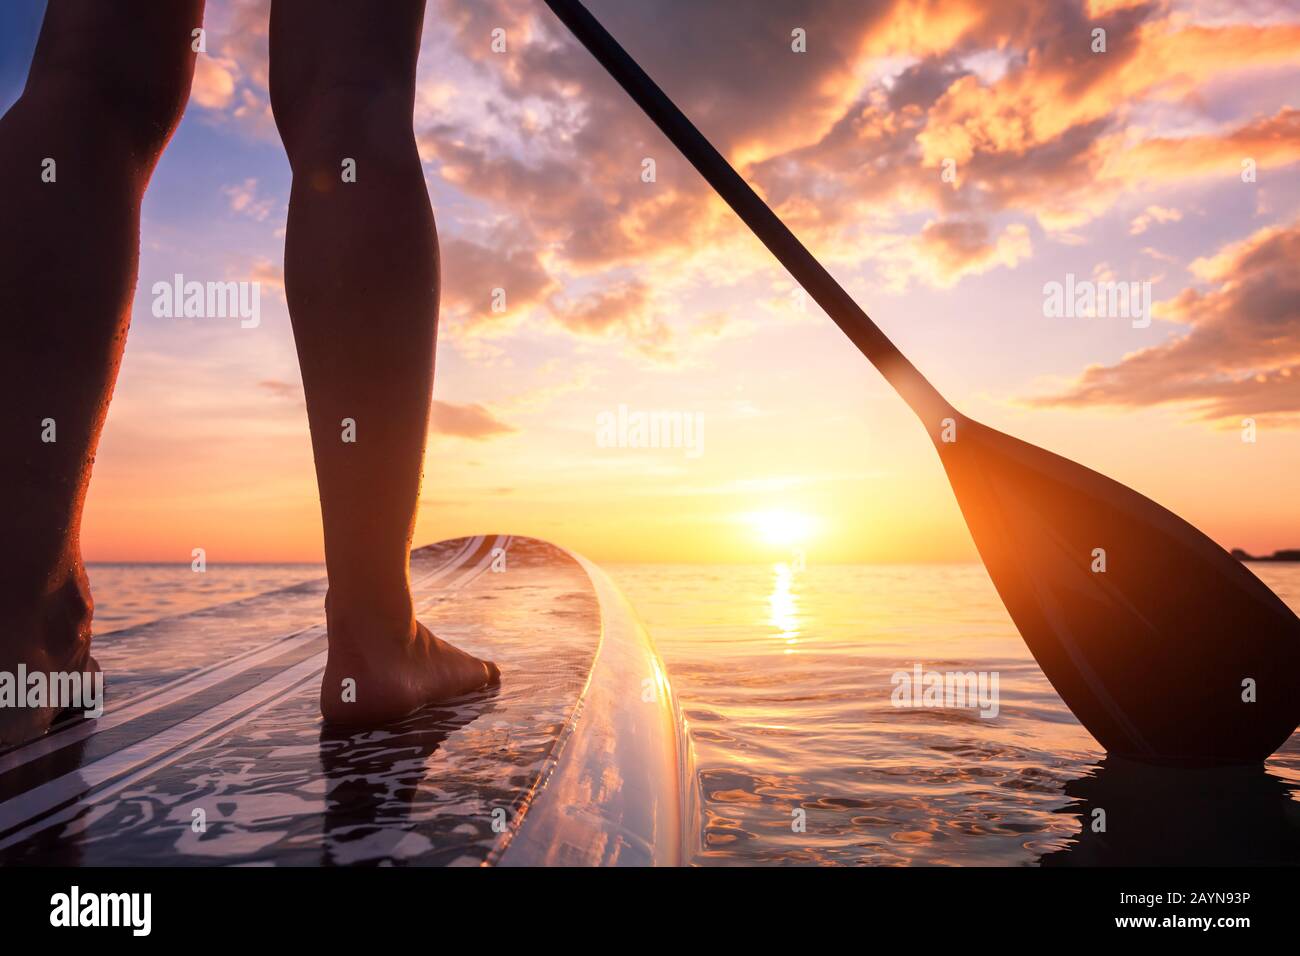 Stand up paddle boarding or standup paddleboarding on quiet sea at sunset with beautiful colors during warm summer beach vacation holiday, active woma Stock Photo